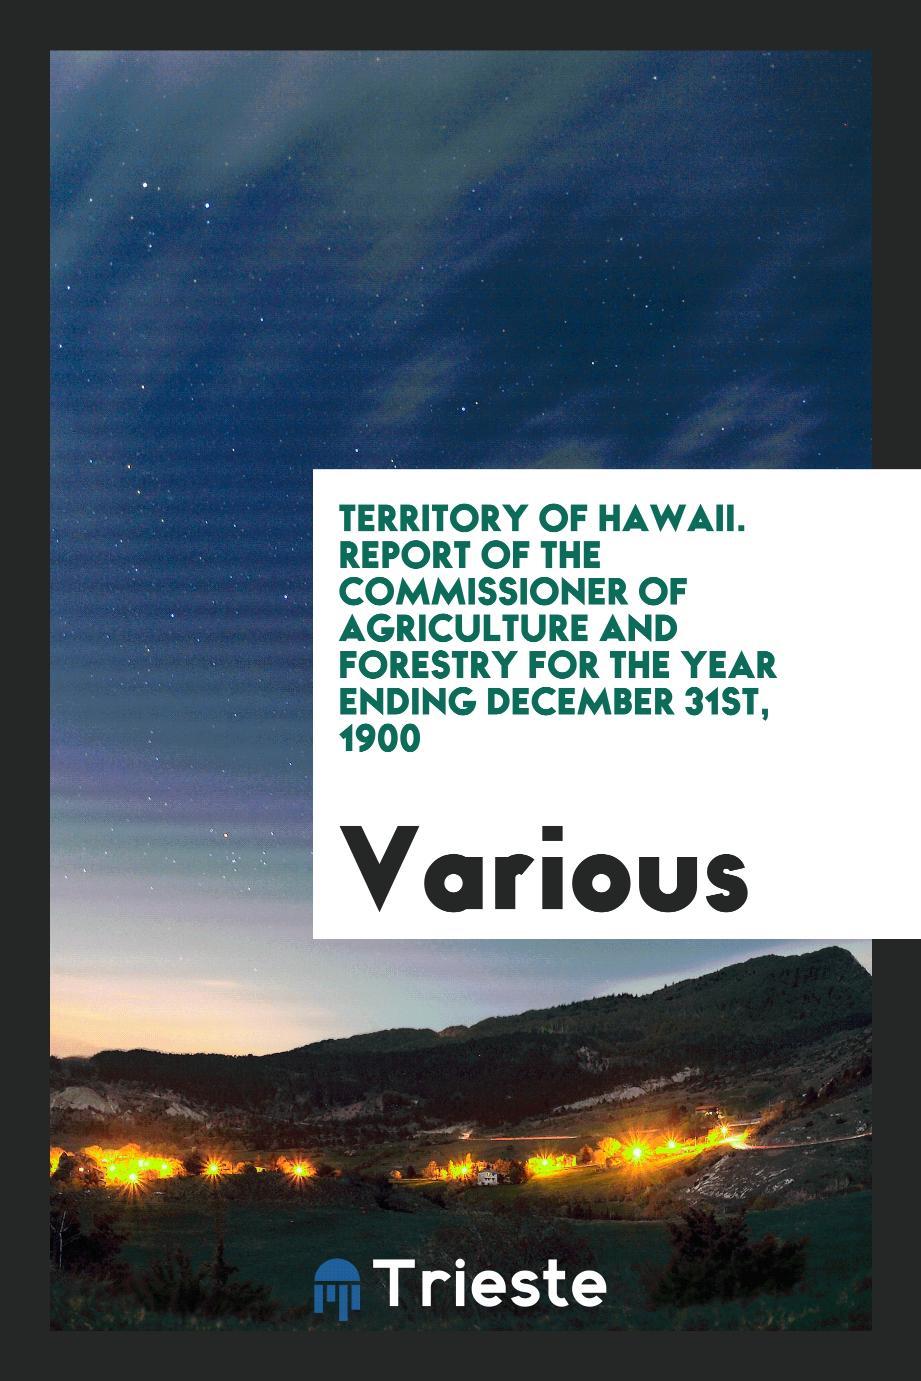 Territory of Hawaii. Report of the Commissioner of Agriculture and Forestry for the Year Ending December 31st, 1900